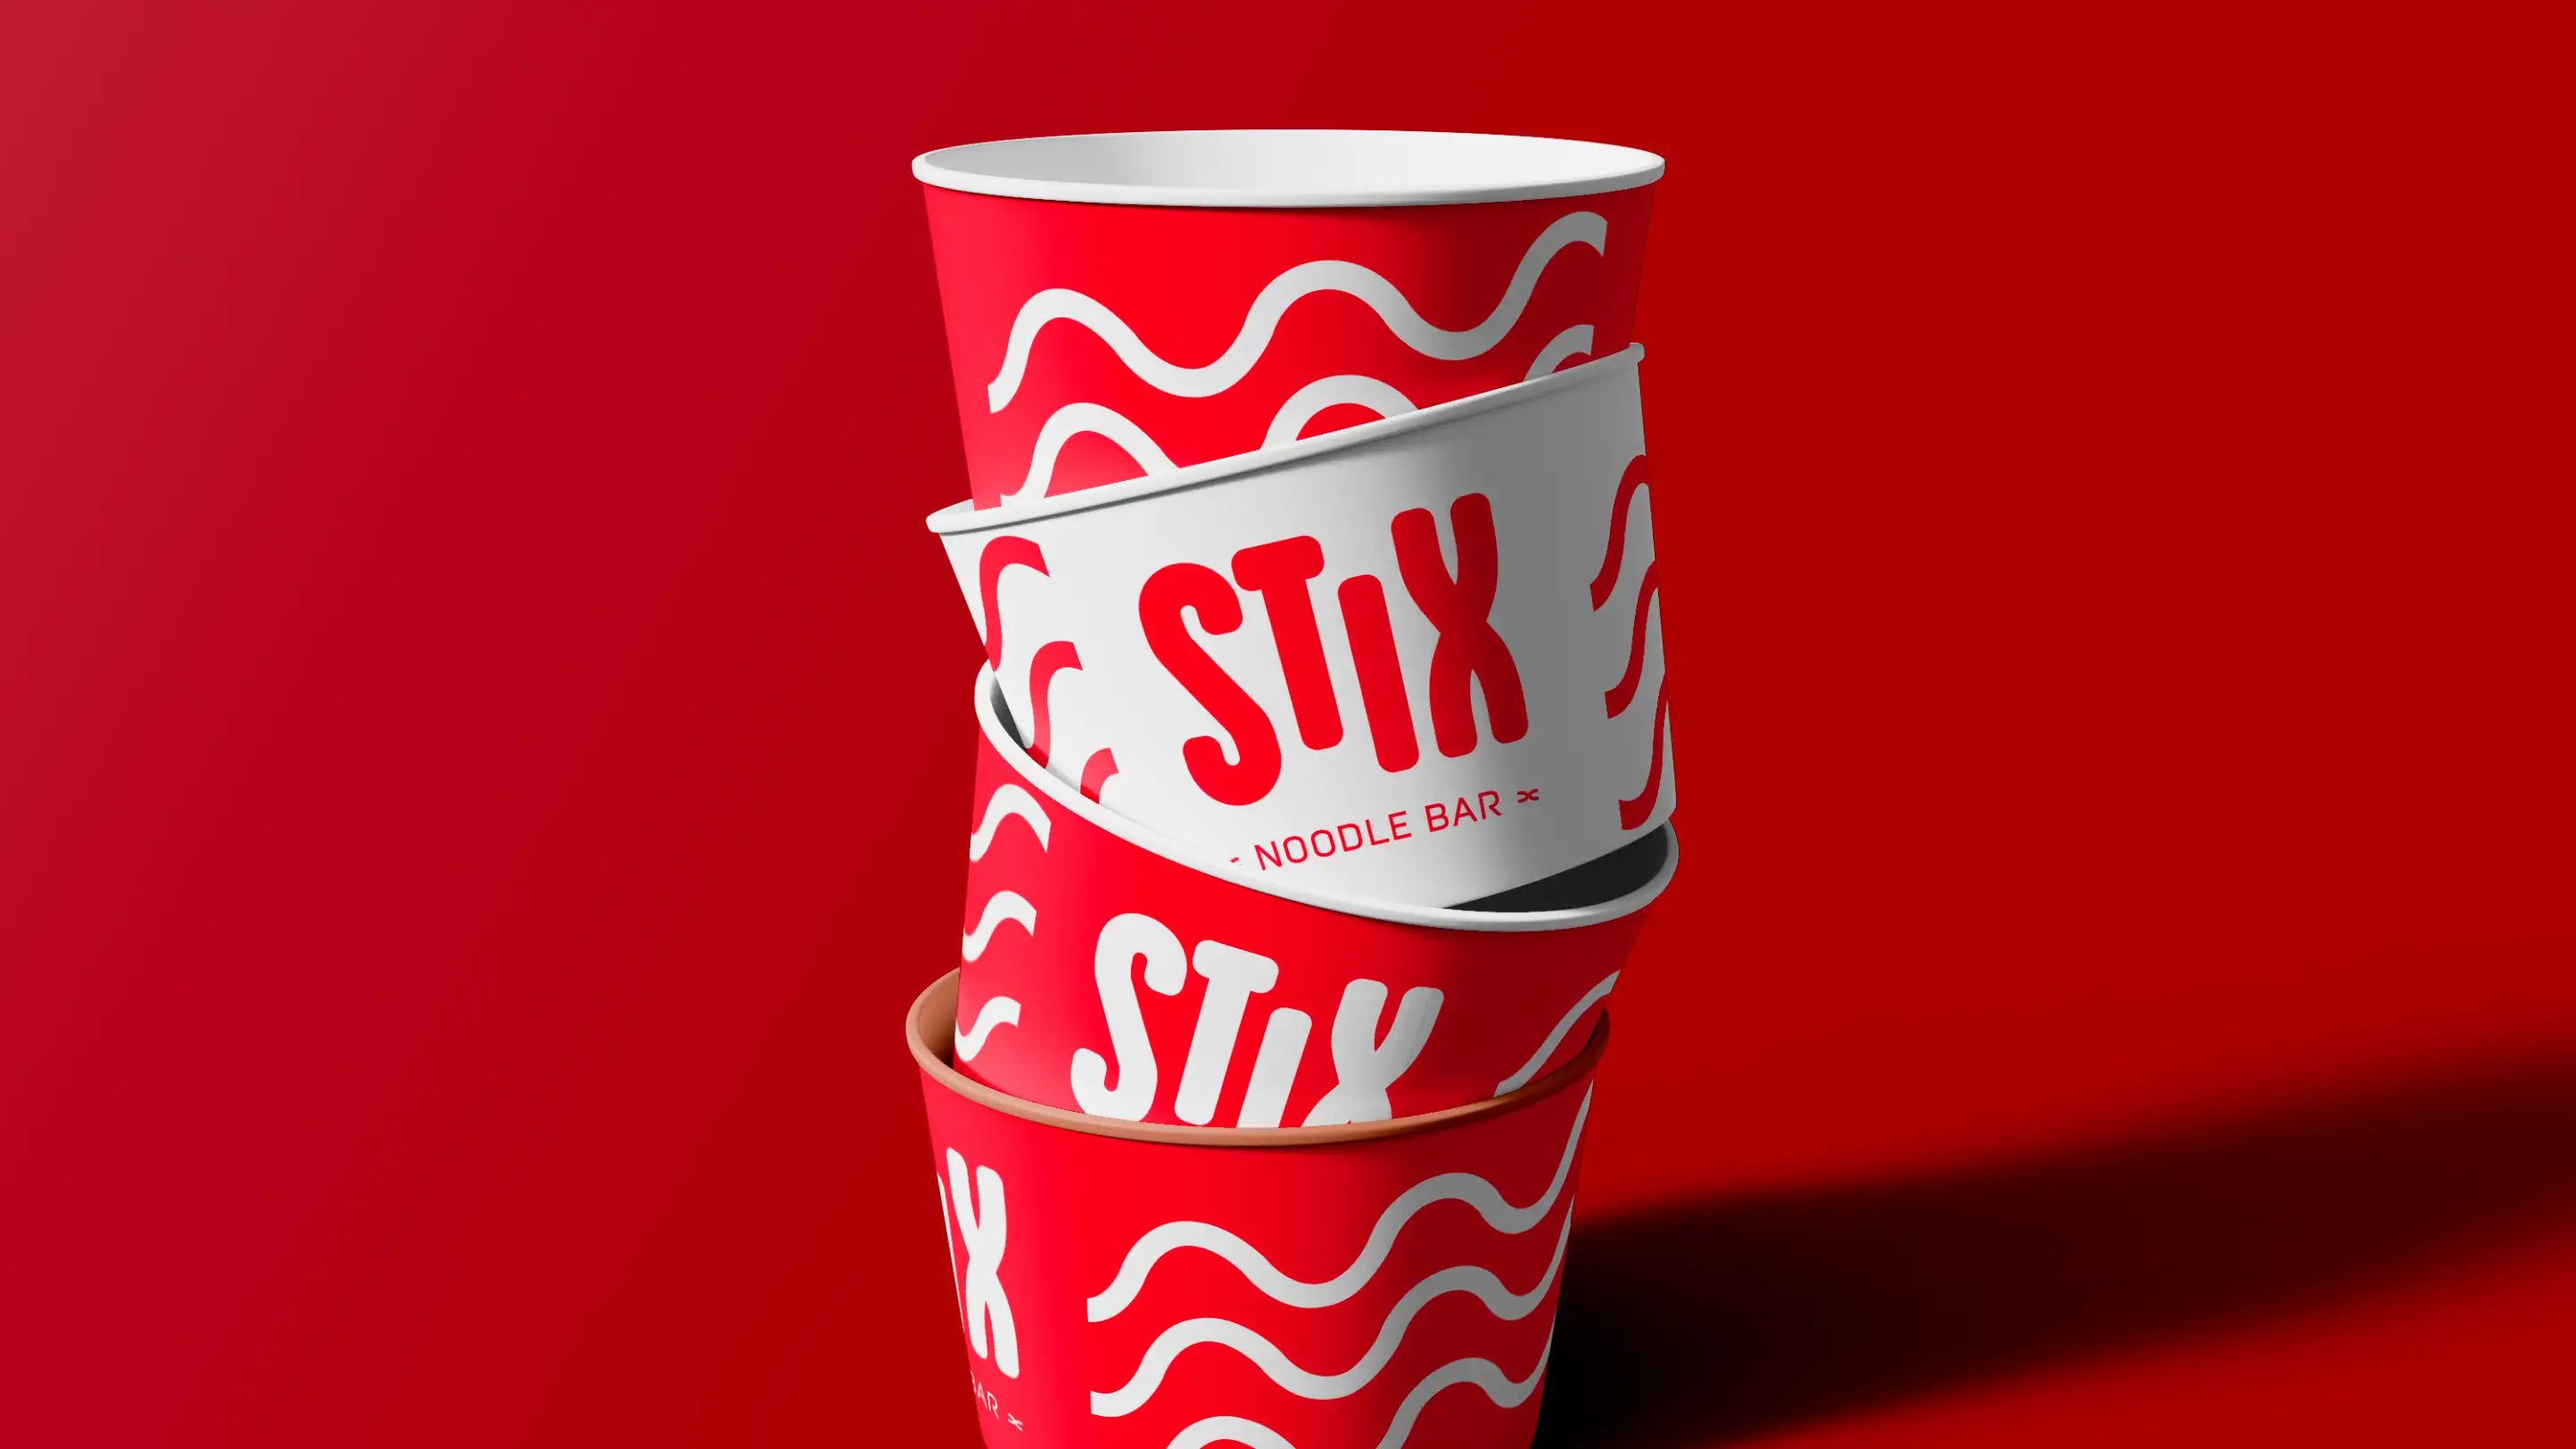 Stix Noodle Bar logo on takeaway containers.